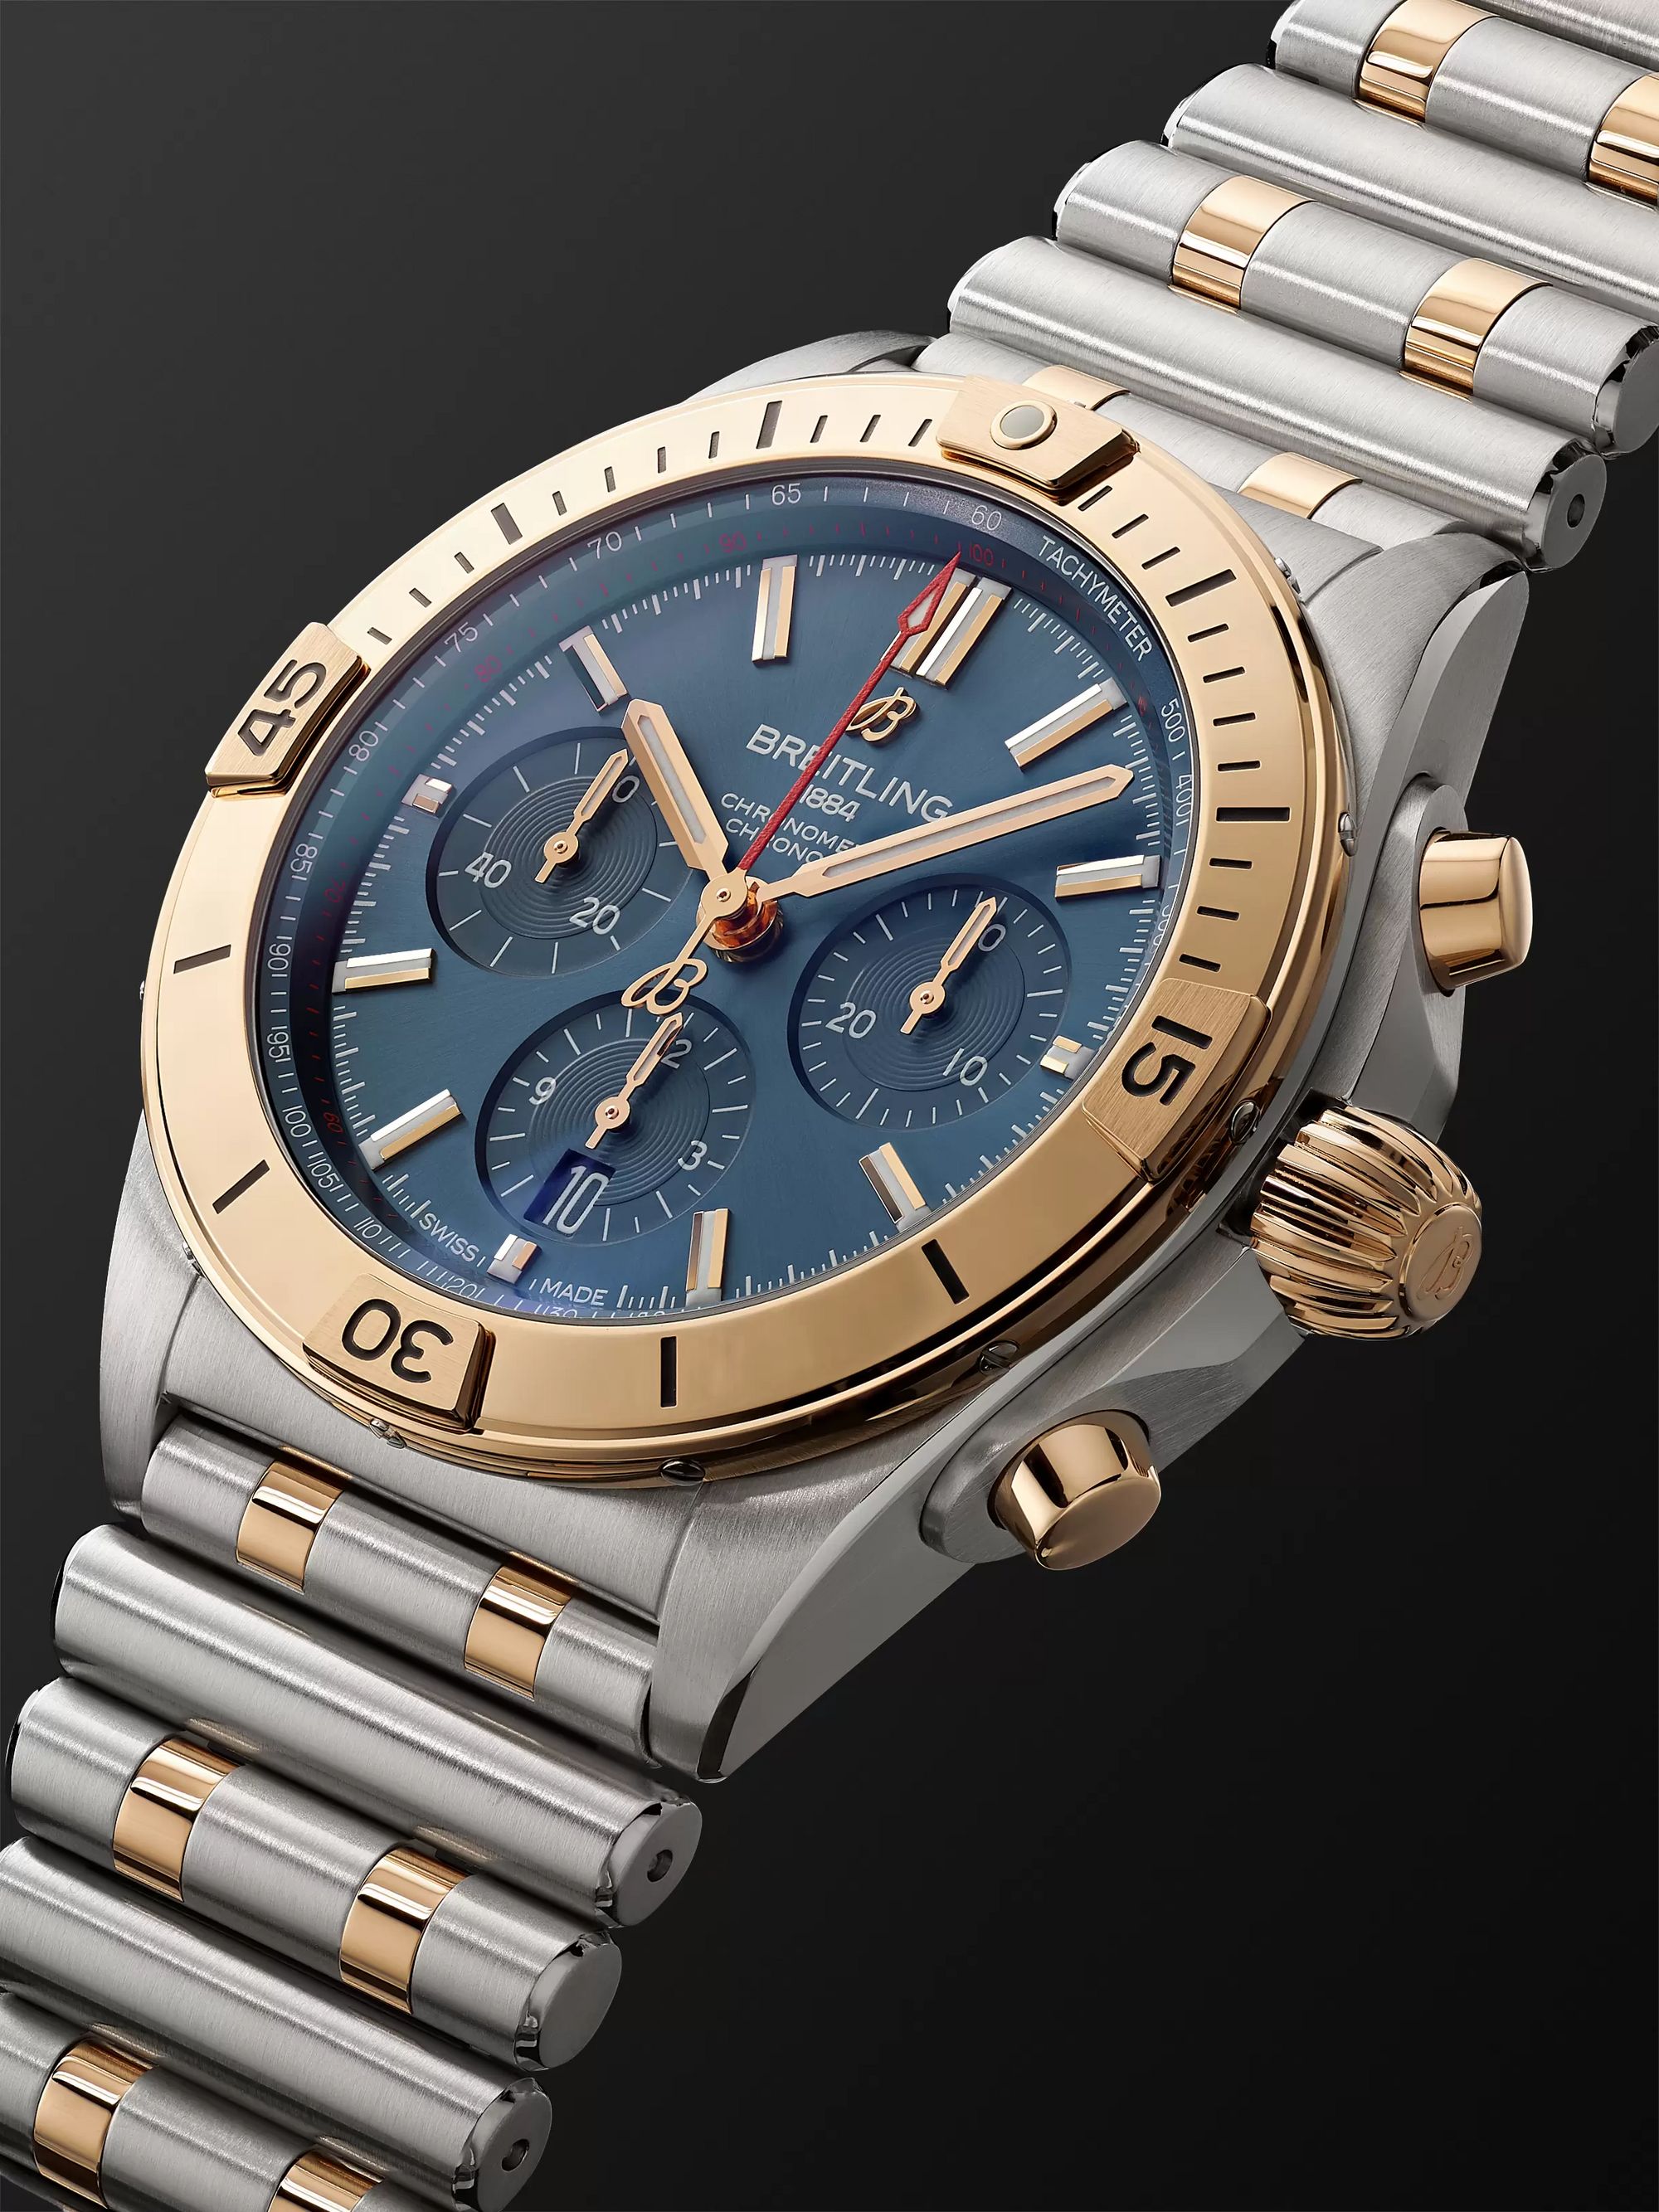 BREITLING Chronomat B01 Automatic Chronograph 42mm Stainless Steel and 18-Karat Red Gold Watch, Ref. No. UB0134101C1U1